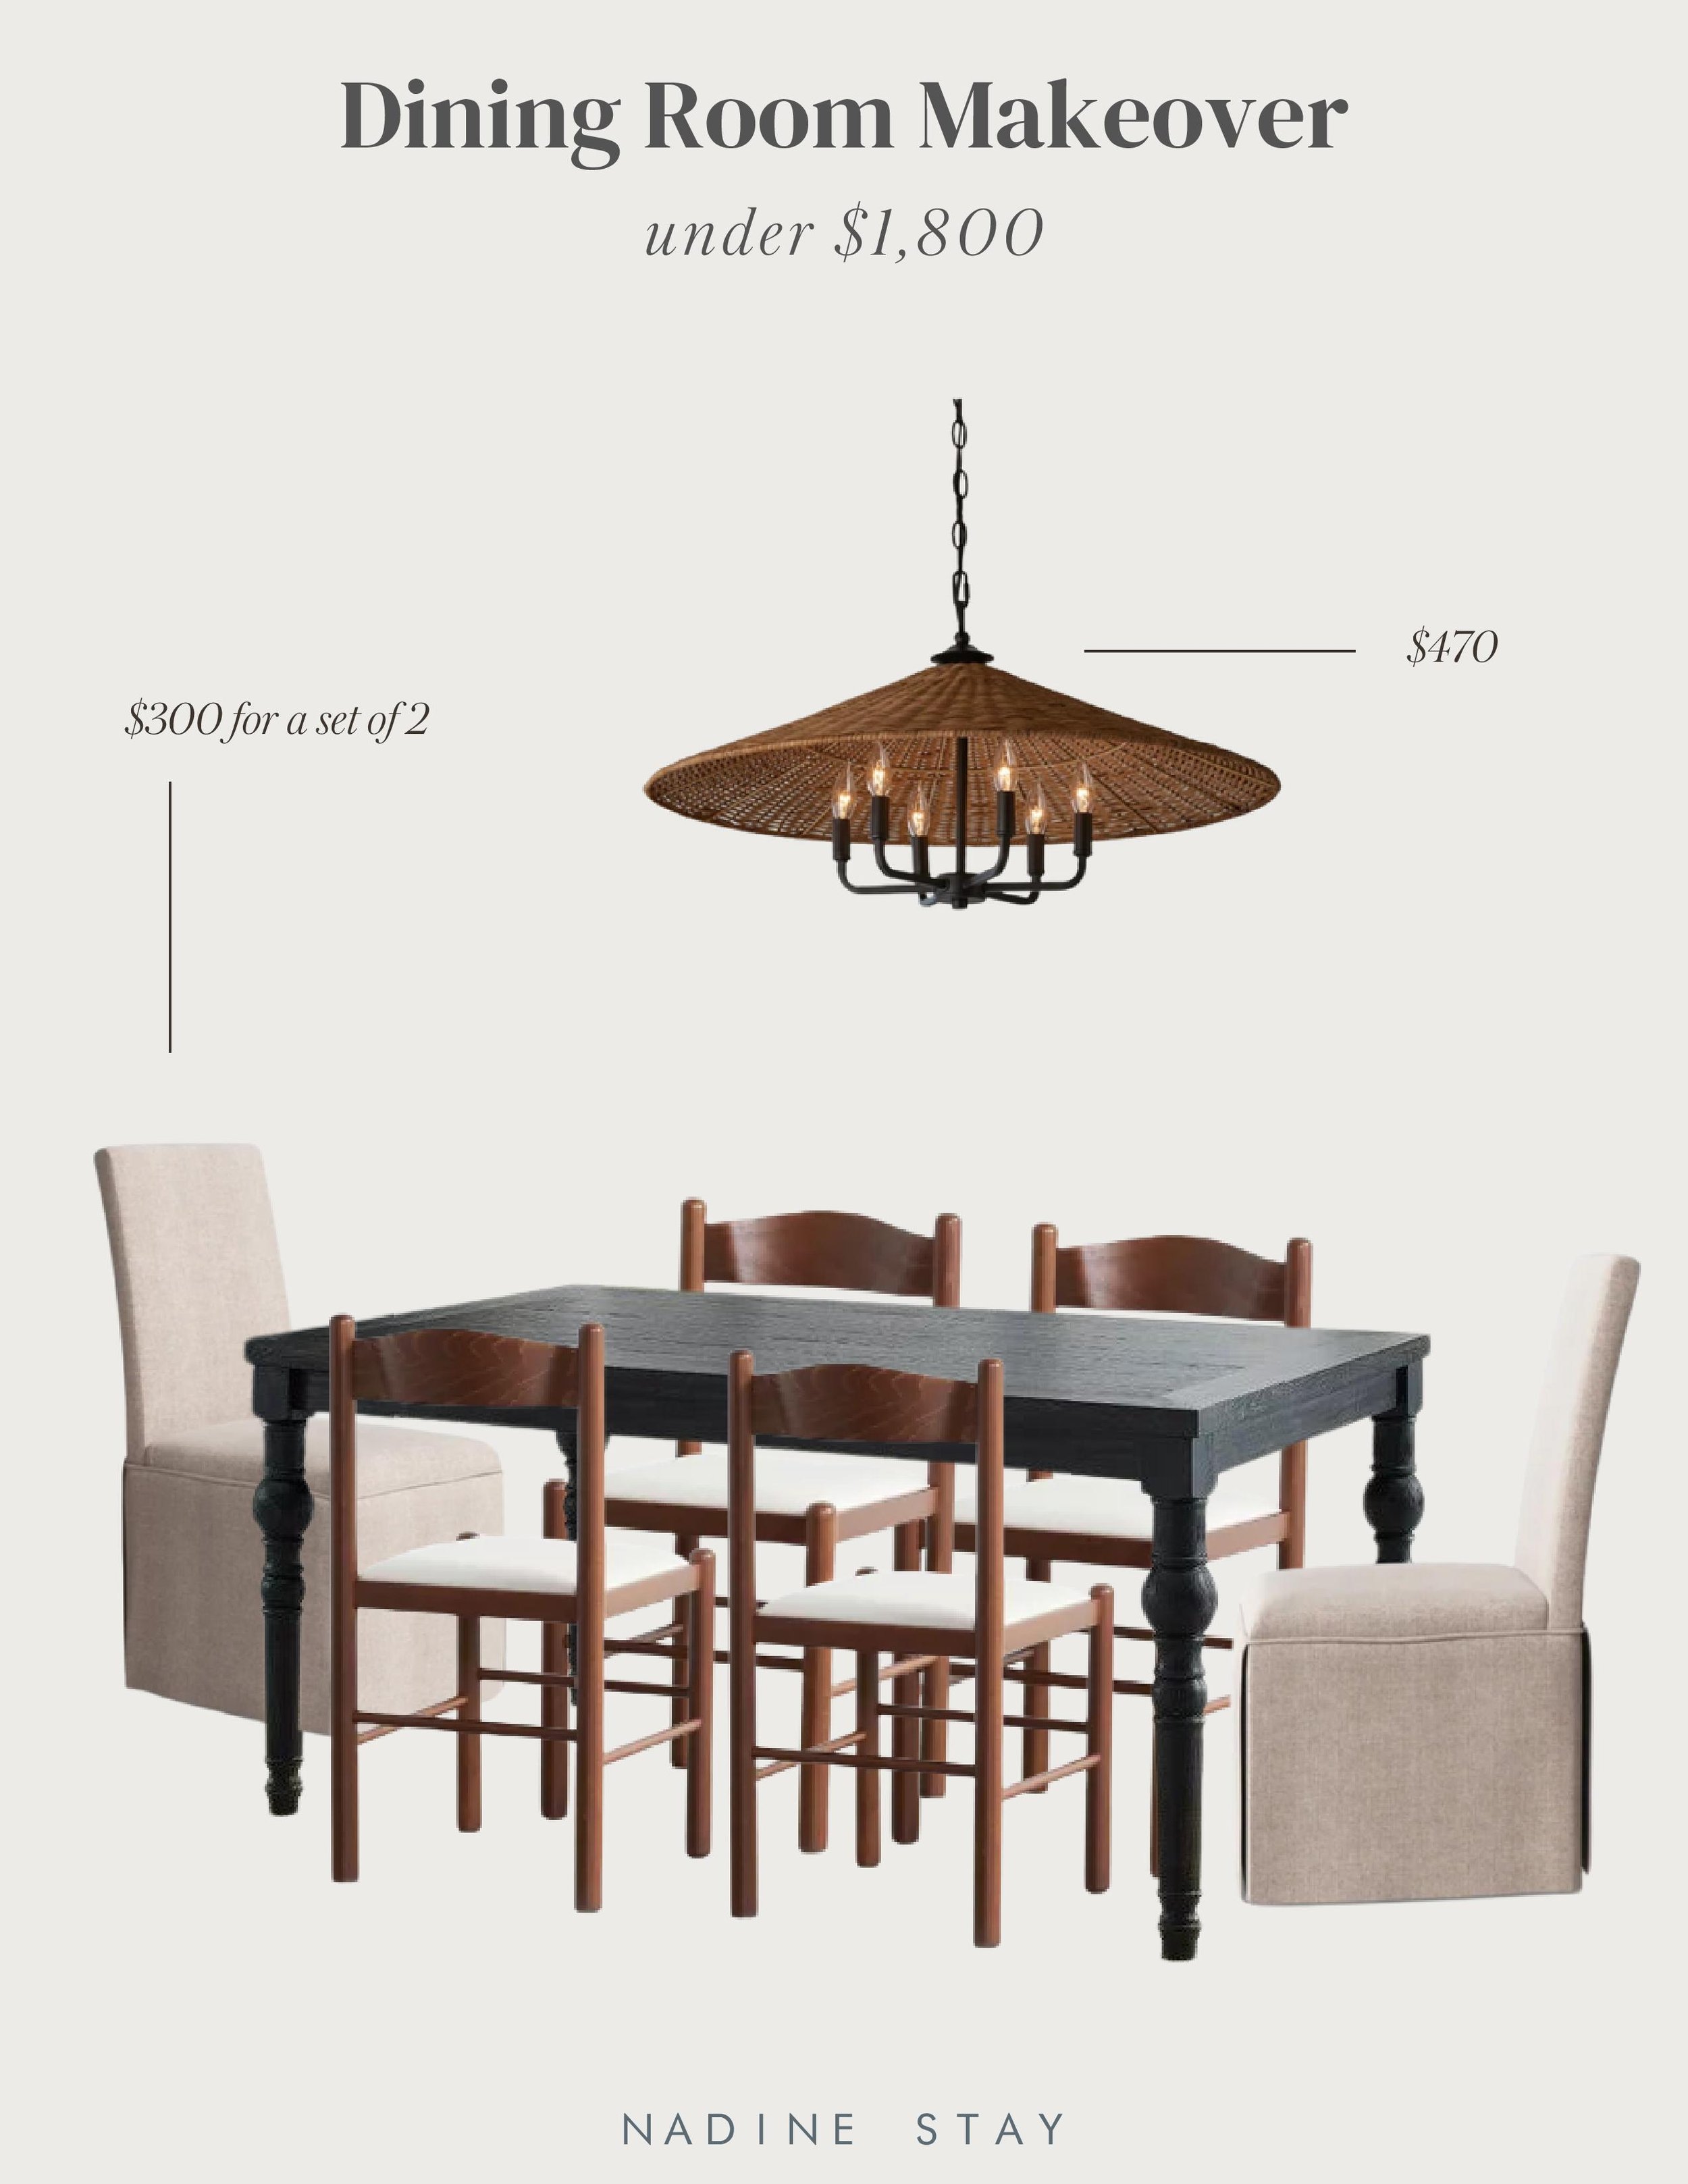 Dining room makeover under $1,800 | How to give your dining room a budget friendly refresh. Black dining table with wood shaker chairs. Dining table under $500. Dining chairs under $300. Rattan chandelier. | Nadine Stay